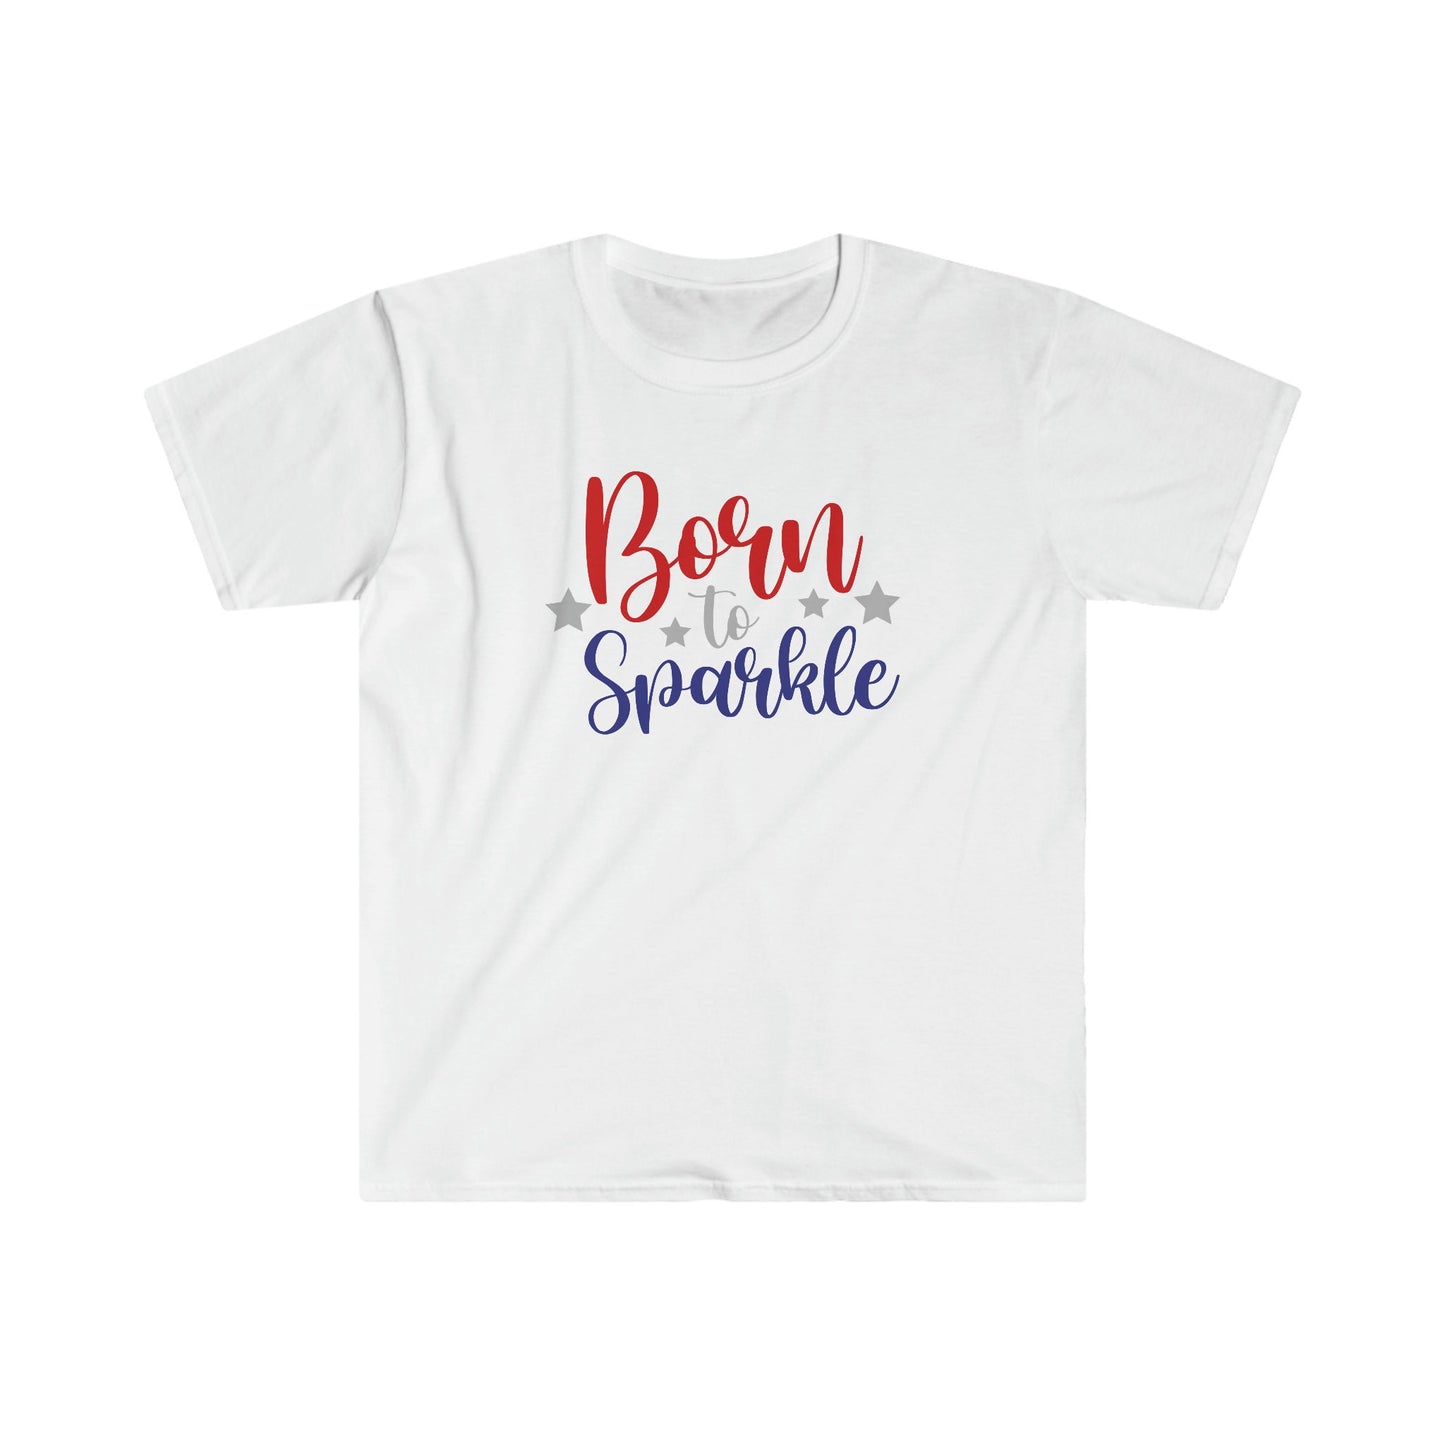 Born to Sparkle - American Flag - Red, White, Blue - 4th of July - Independence Day - Unisex Softstyle T-Shirt